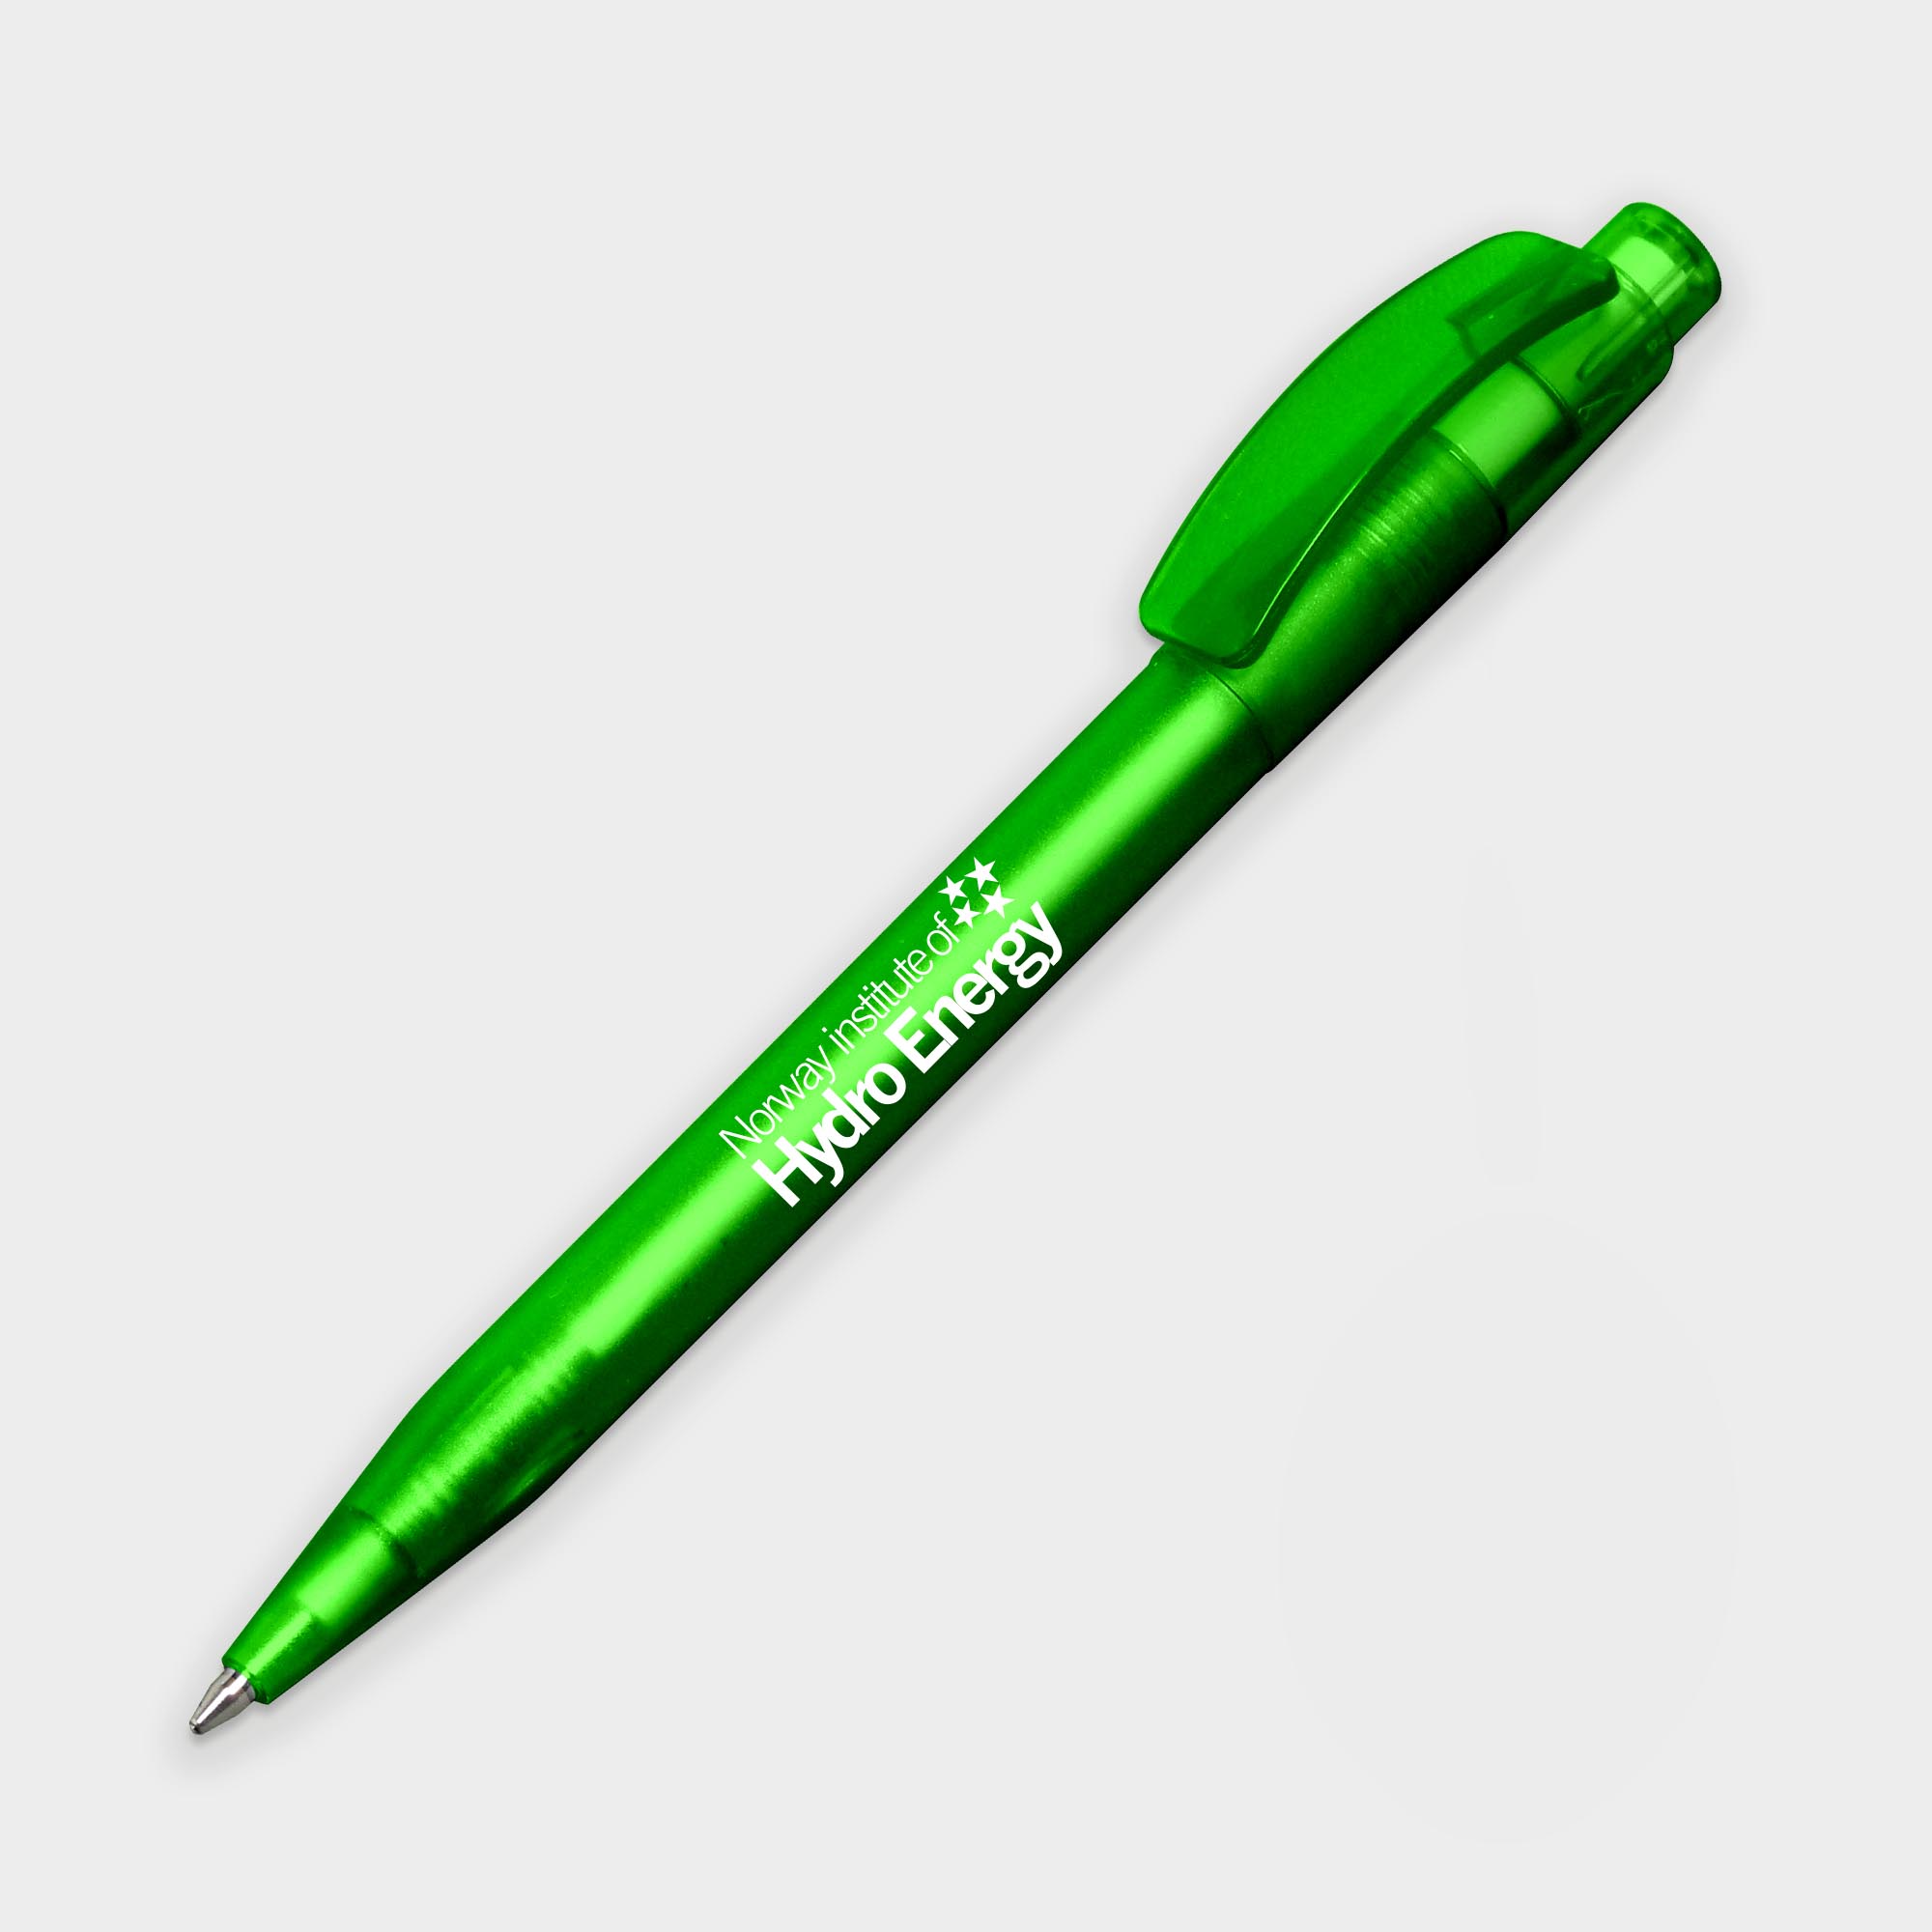 The Green & Good Indus Pen made from biodegradable plastic. Push button pen in a variety of colours. Black ink as standard. Green